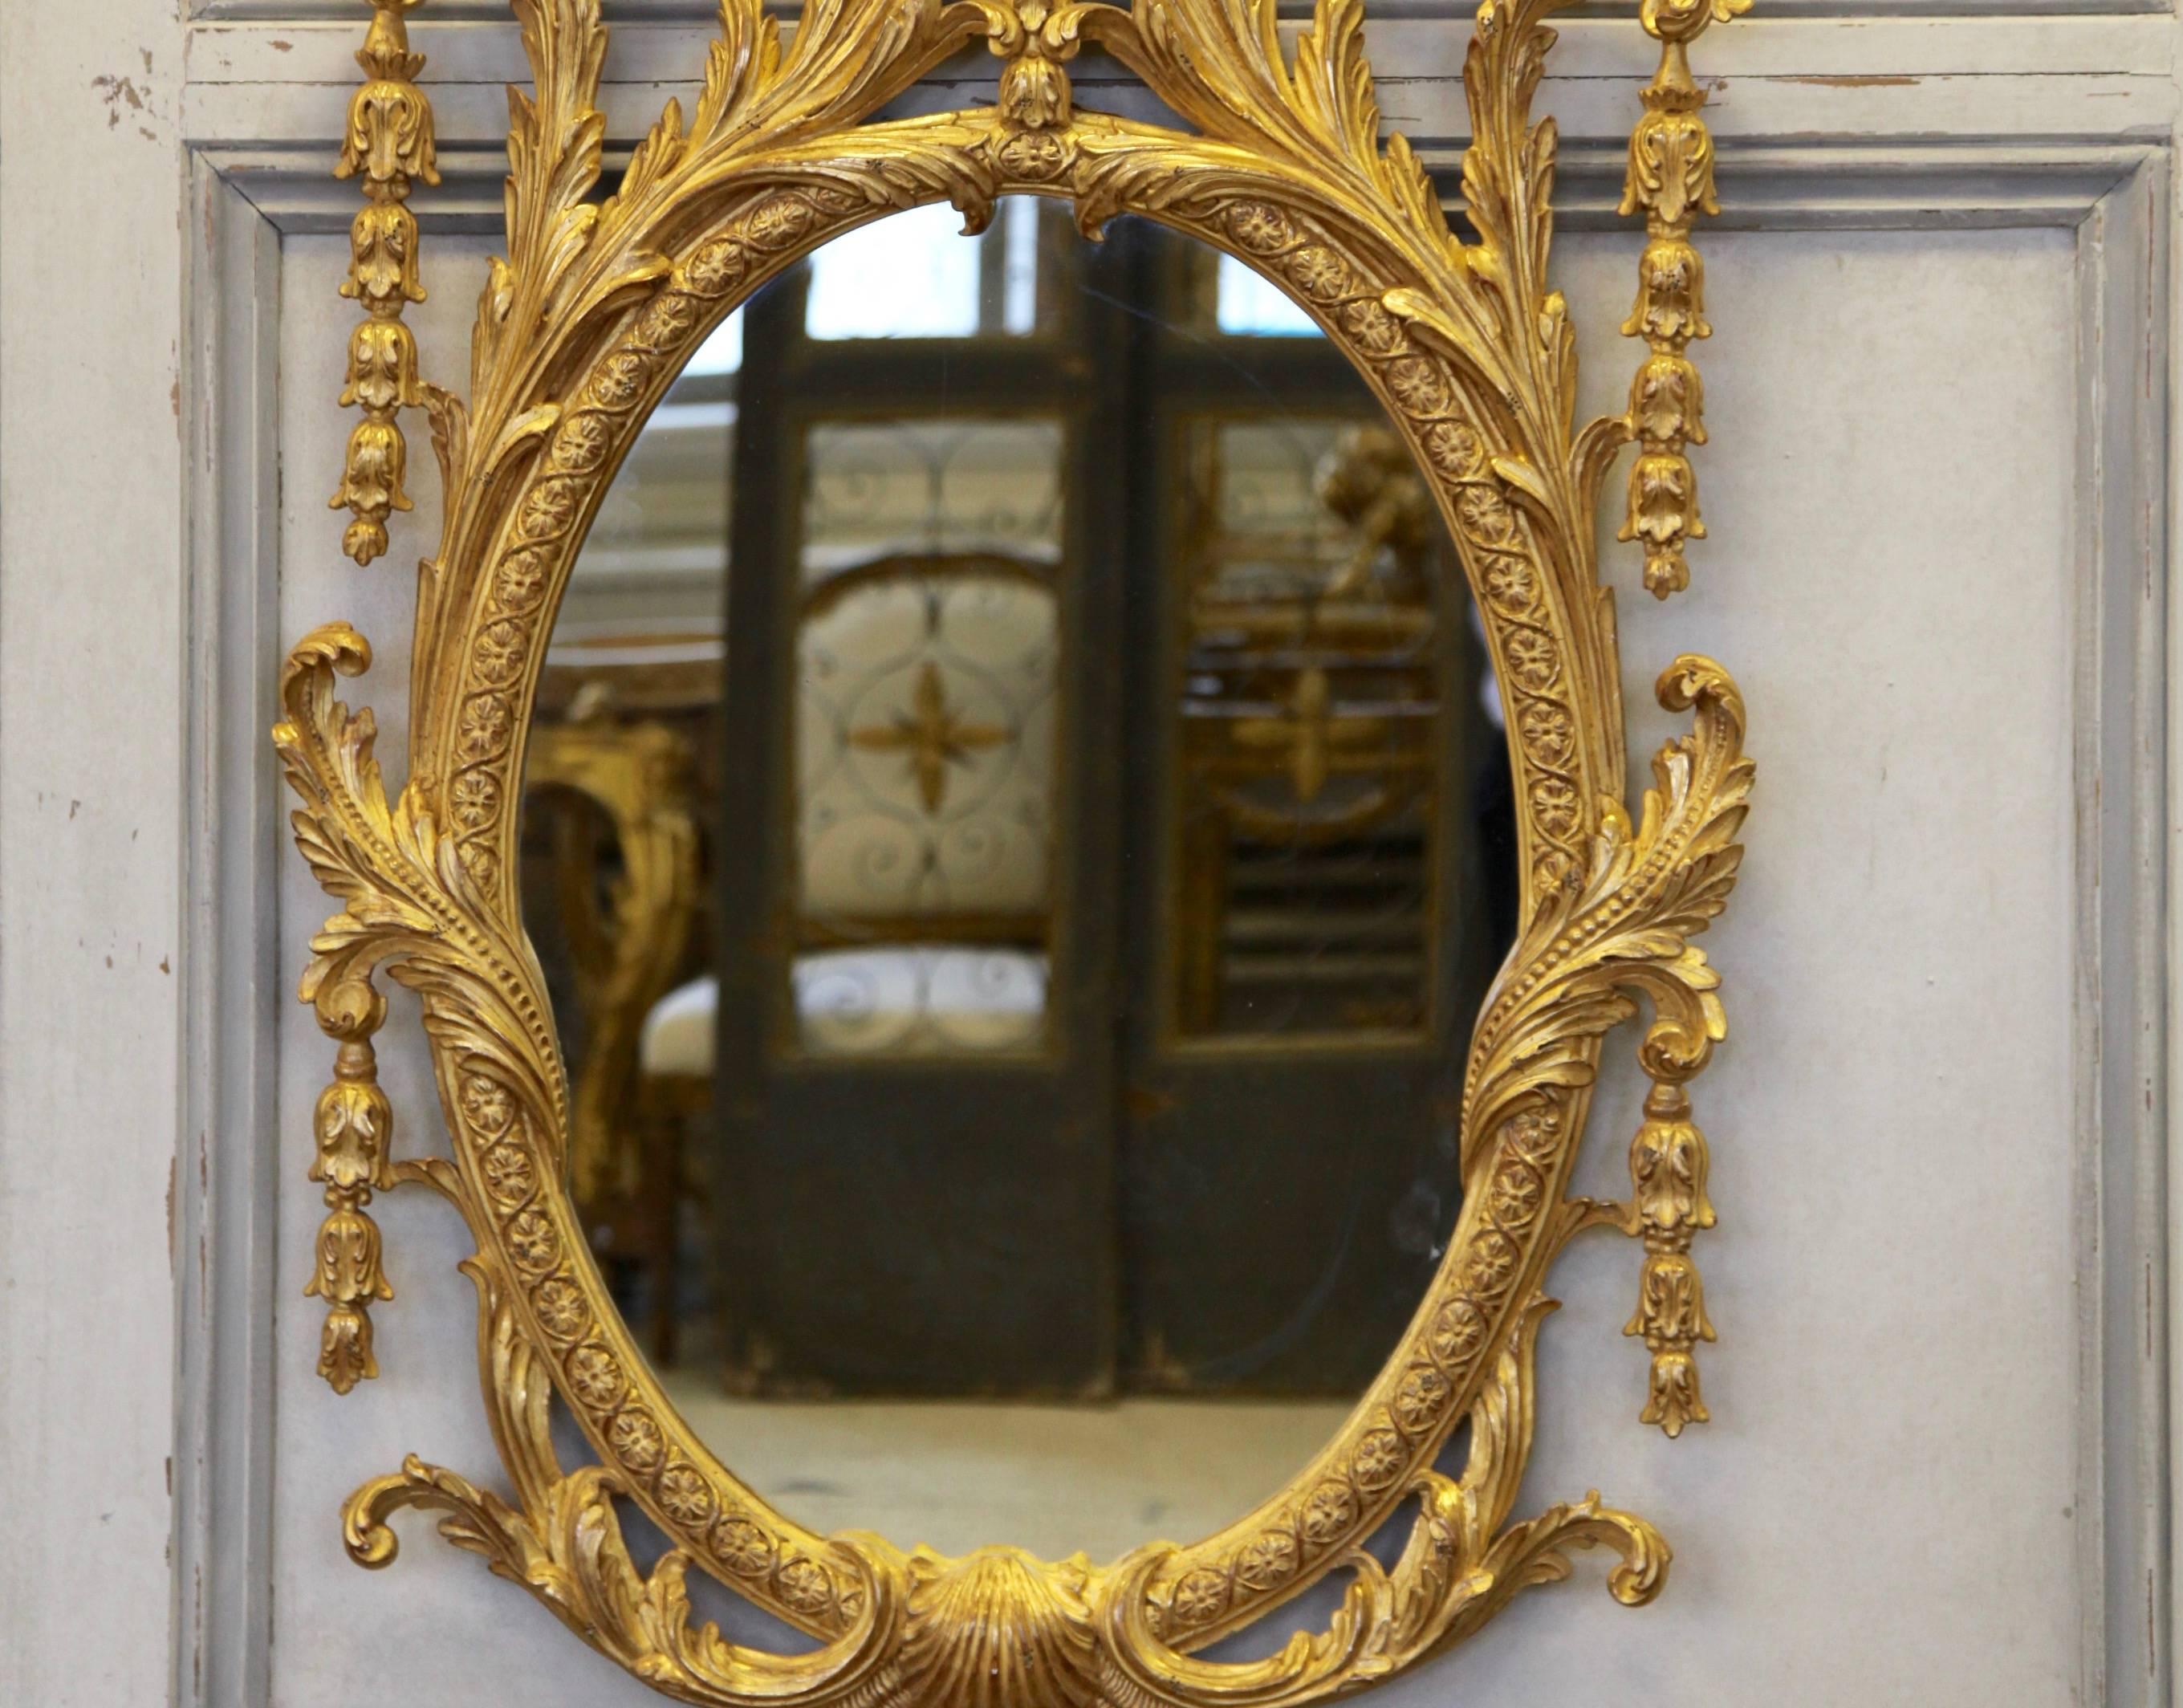 English George IV style Mirror from an original design attributed to John Vardy: hand-carved by master craftsmen in an aged, water gilded finish made using 23.75 carat gold leaf. Picture shows one of a pair available. Can be sold individually or as